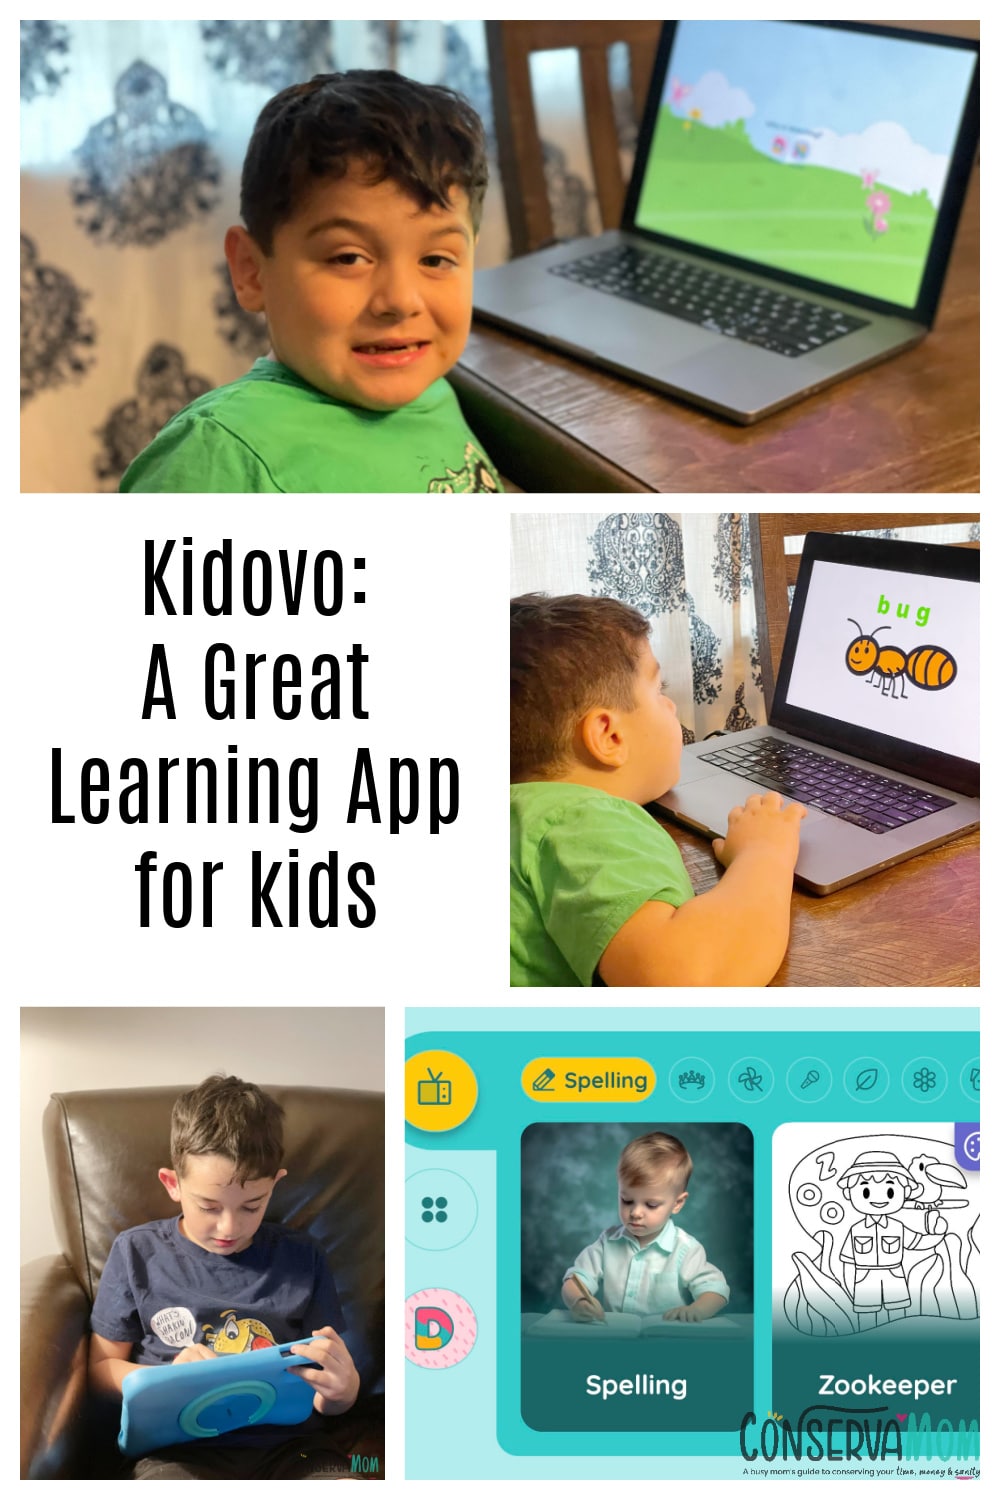 Kidovo: A Great Learning App for kids